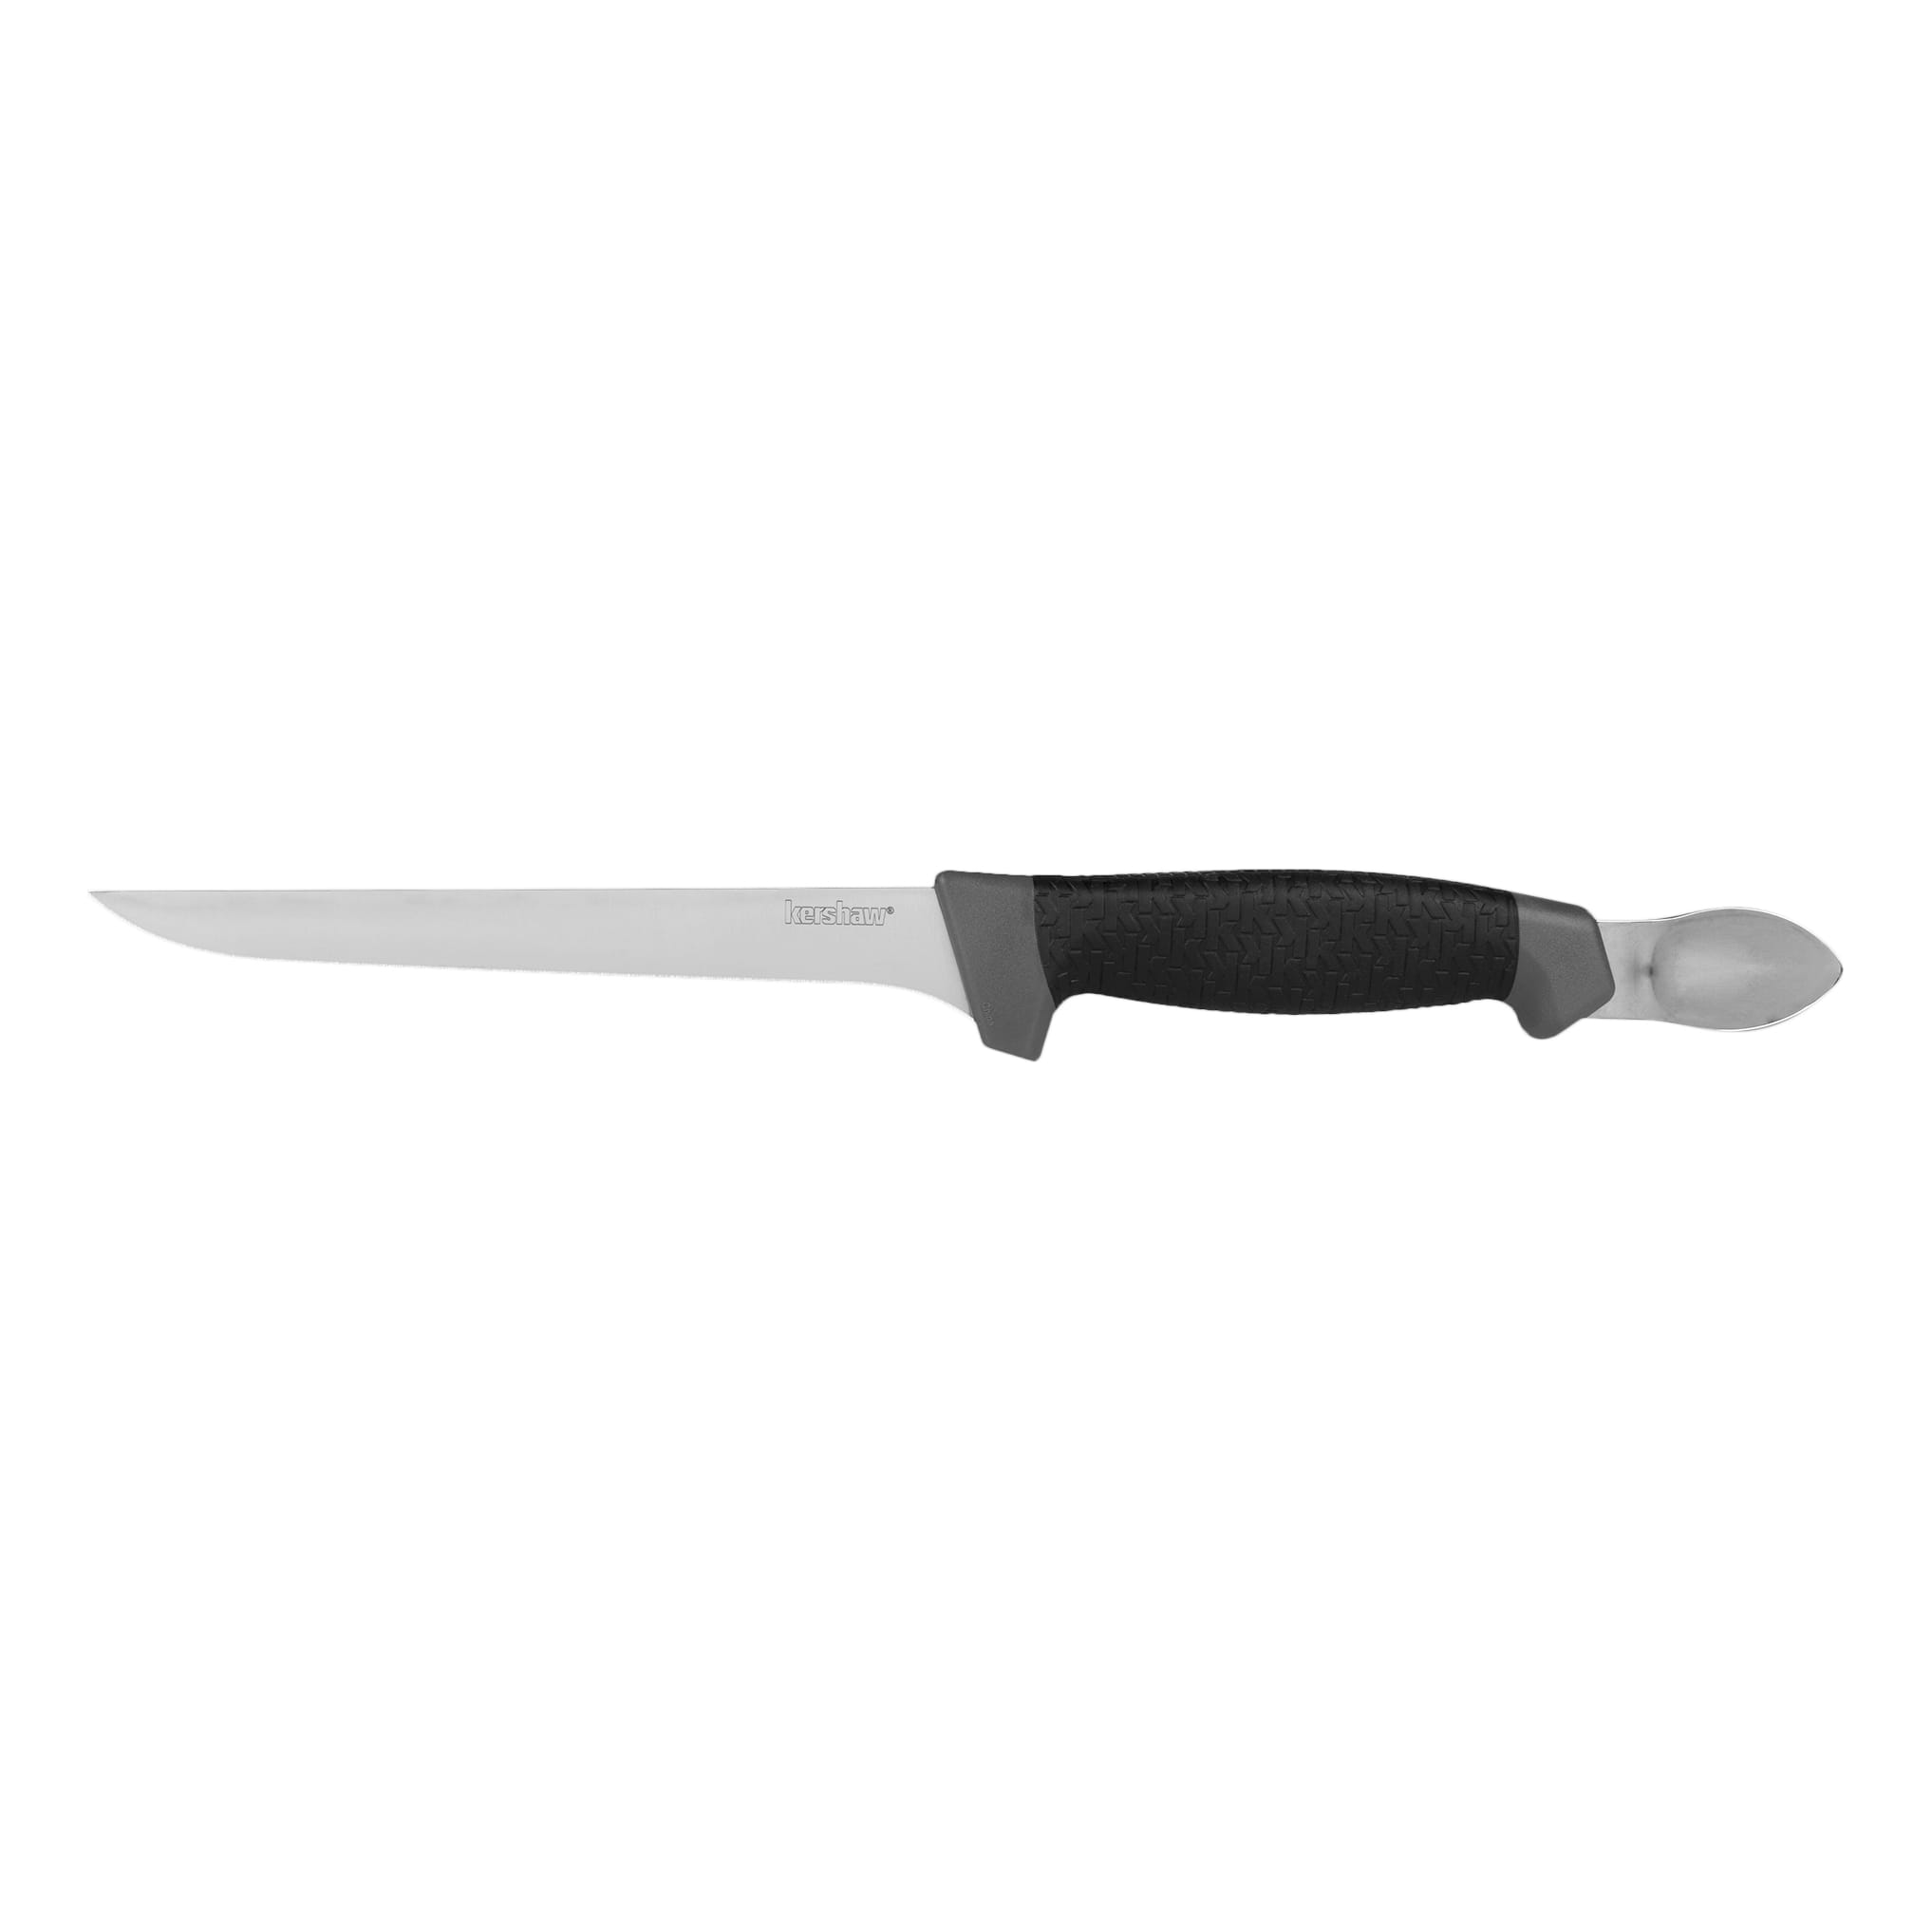 Kershaw 7 Boning Knife With Spoon